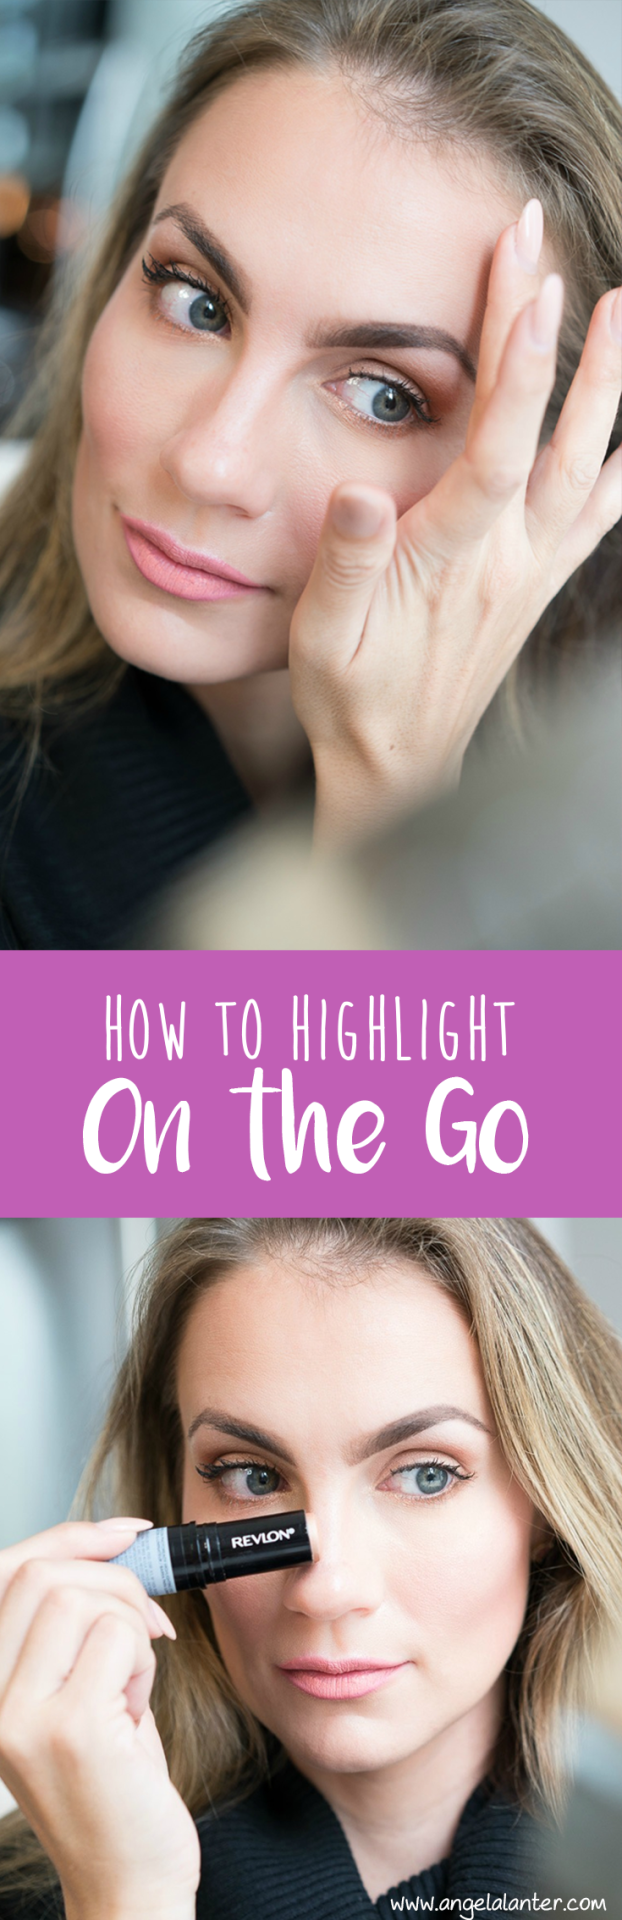 How to highlight on the go by Angela Lanter - Hello Gorgeous